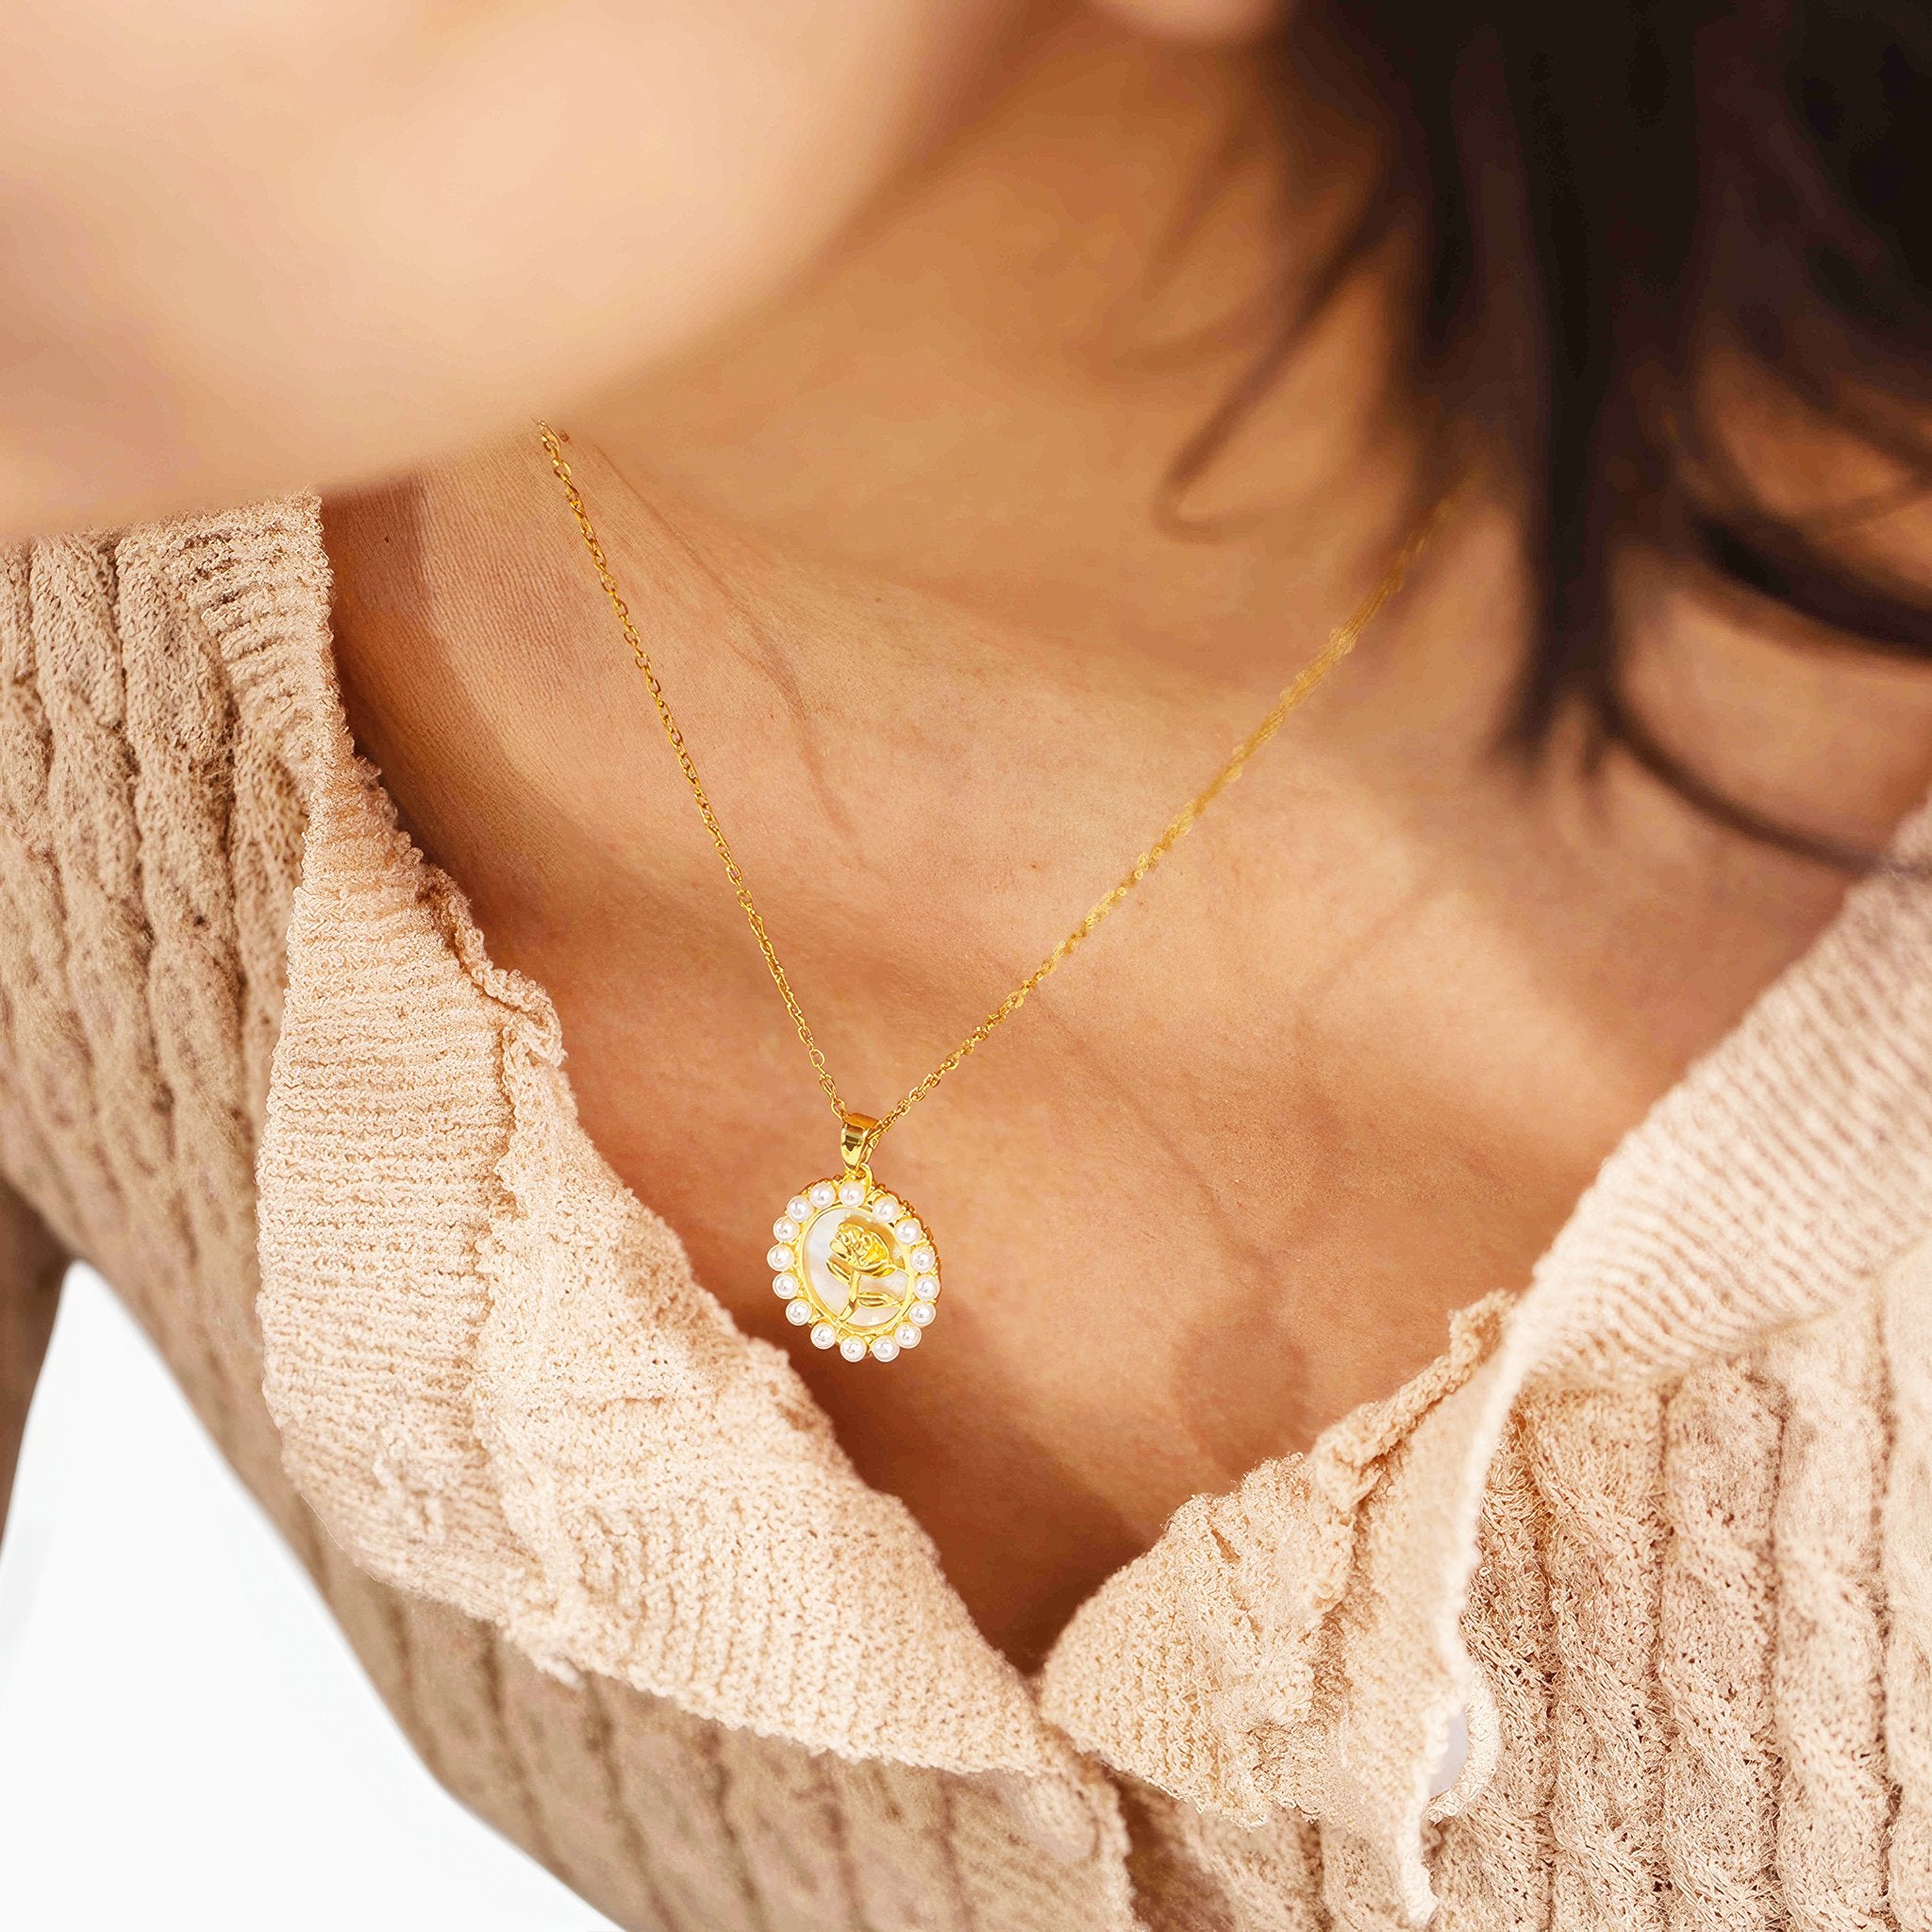 Inlaid Pearl Flower Pendant Necklace - Nobbier - Necklace - 18K Gold And Titanium PVD Coated Jewelry